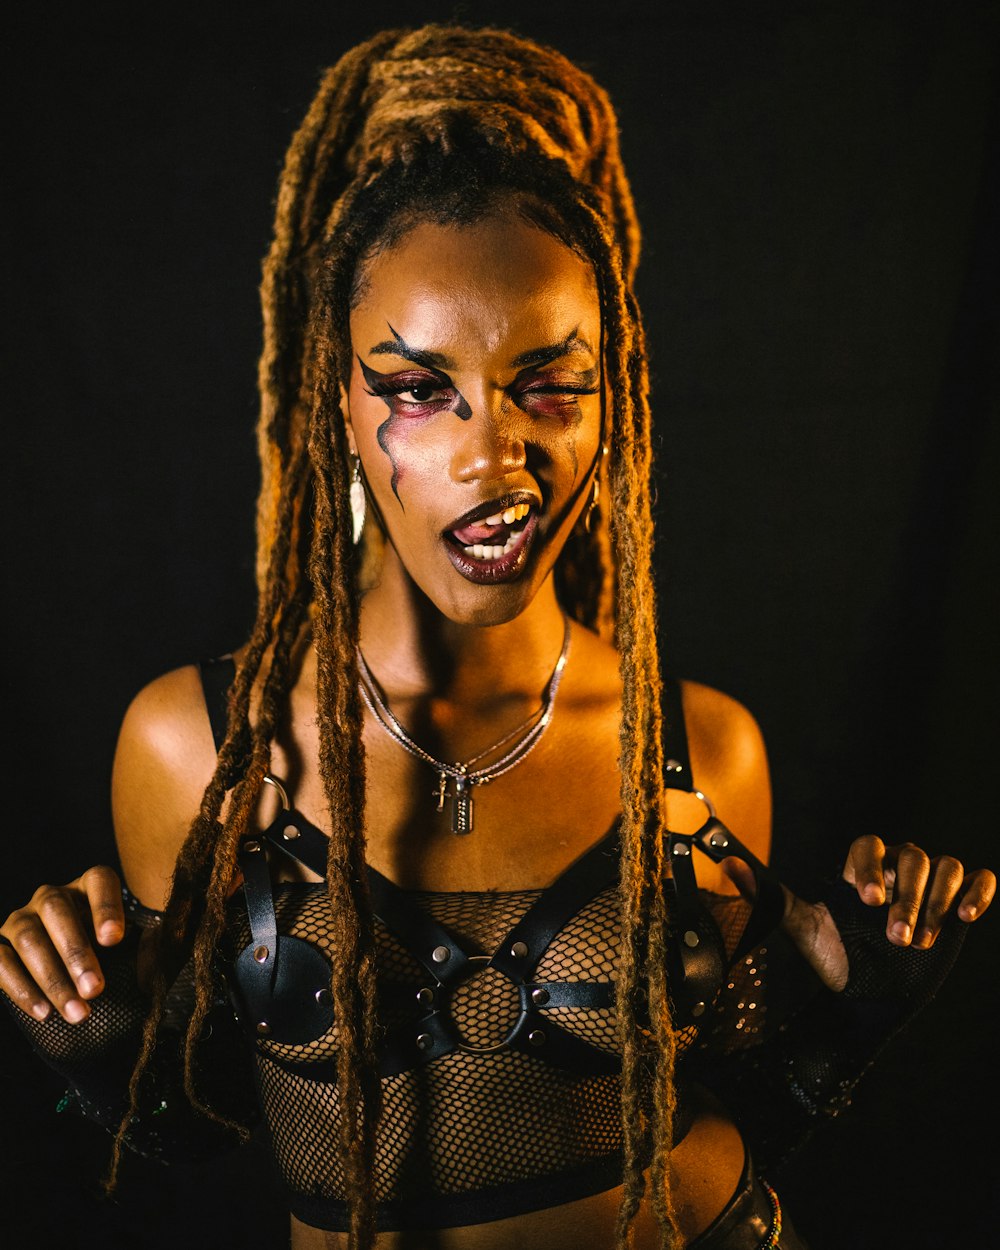 a woman with makeup on her face and dreadlocks